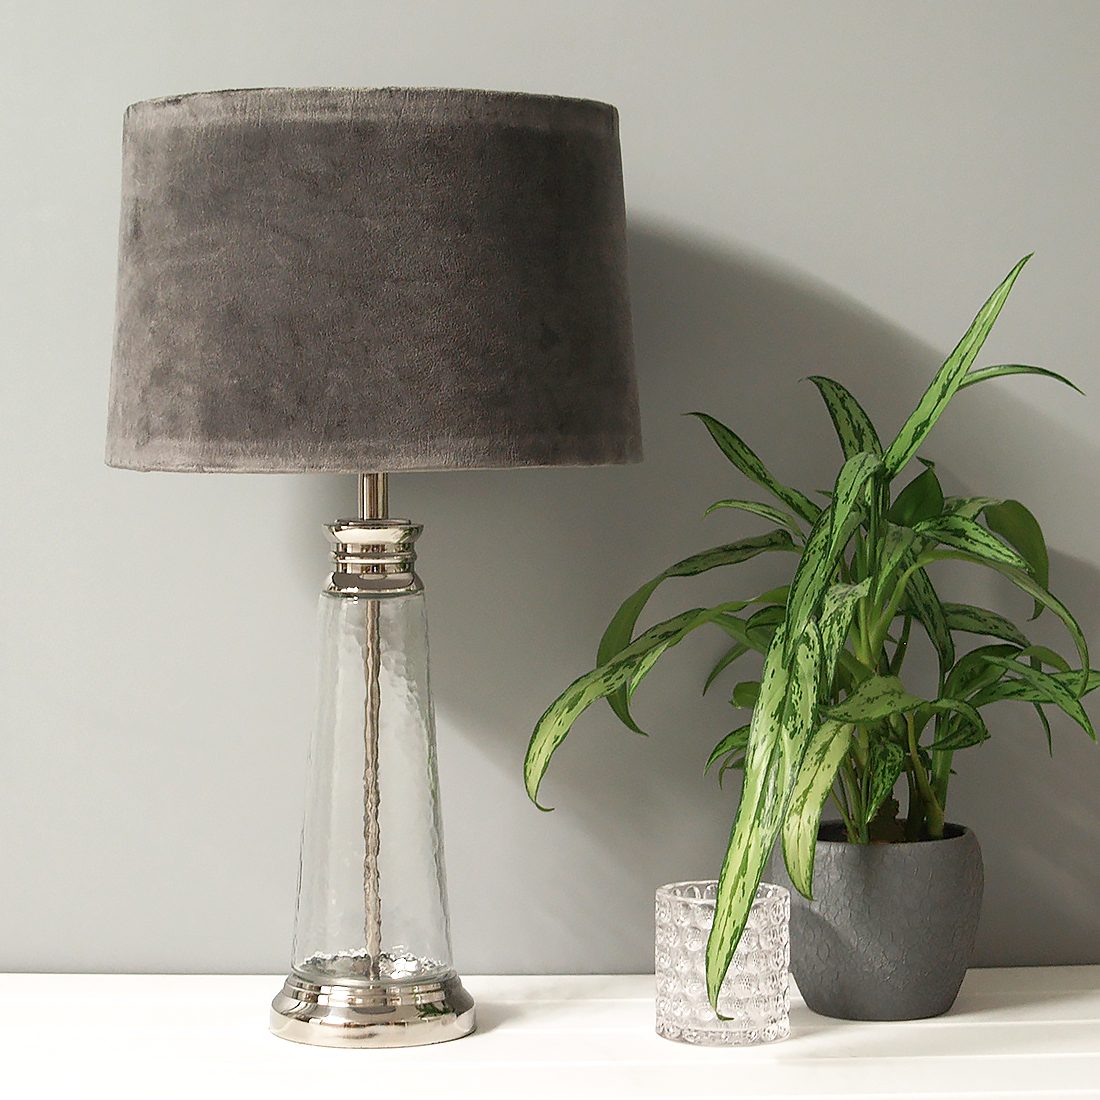 tall grey table lamps